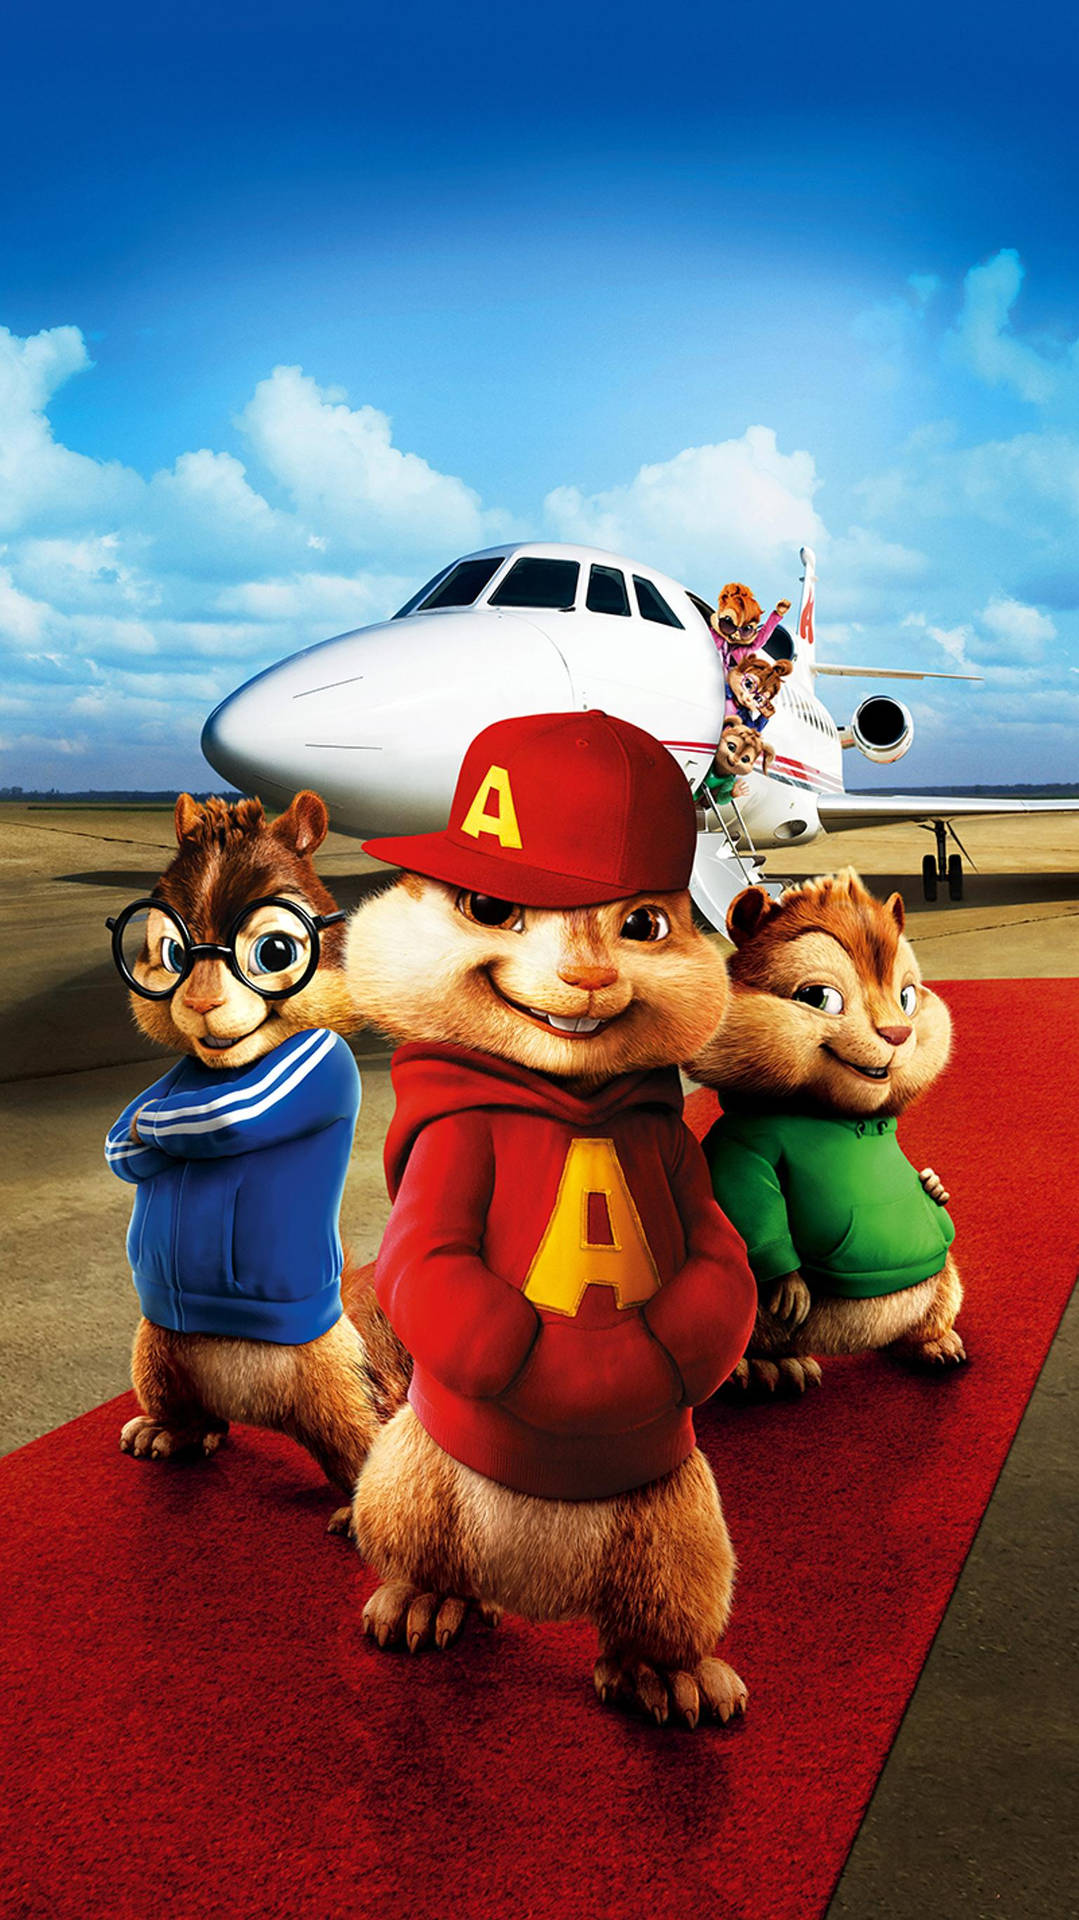 Alvin And The Chipmunks Airplane Wallpaper